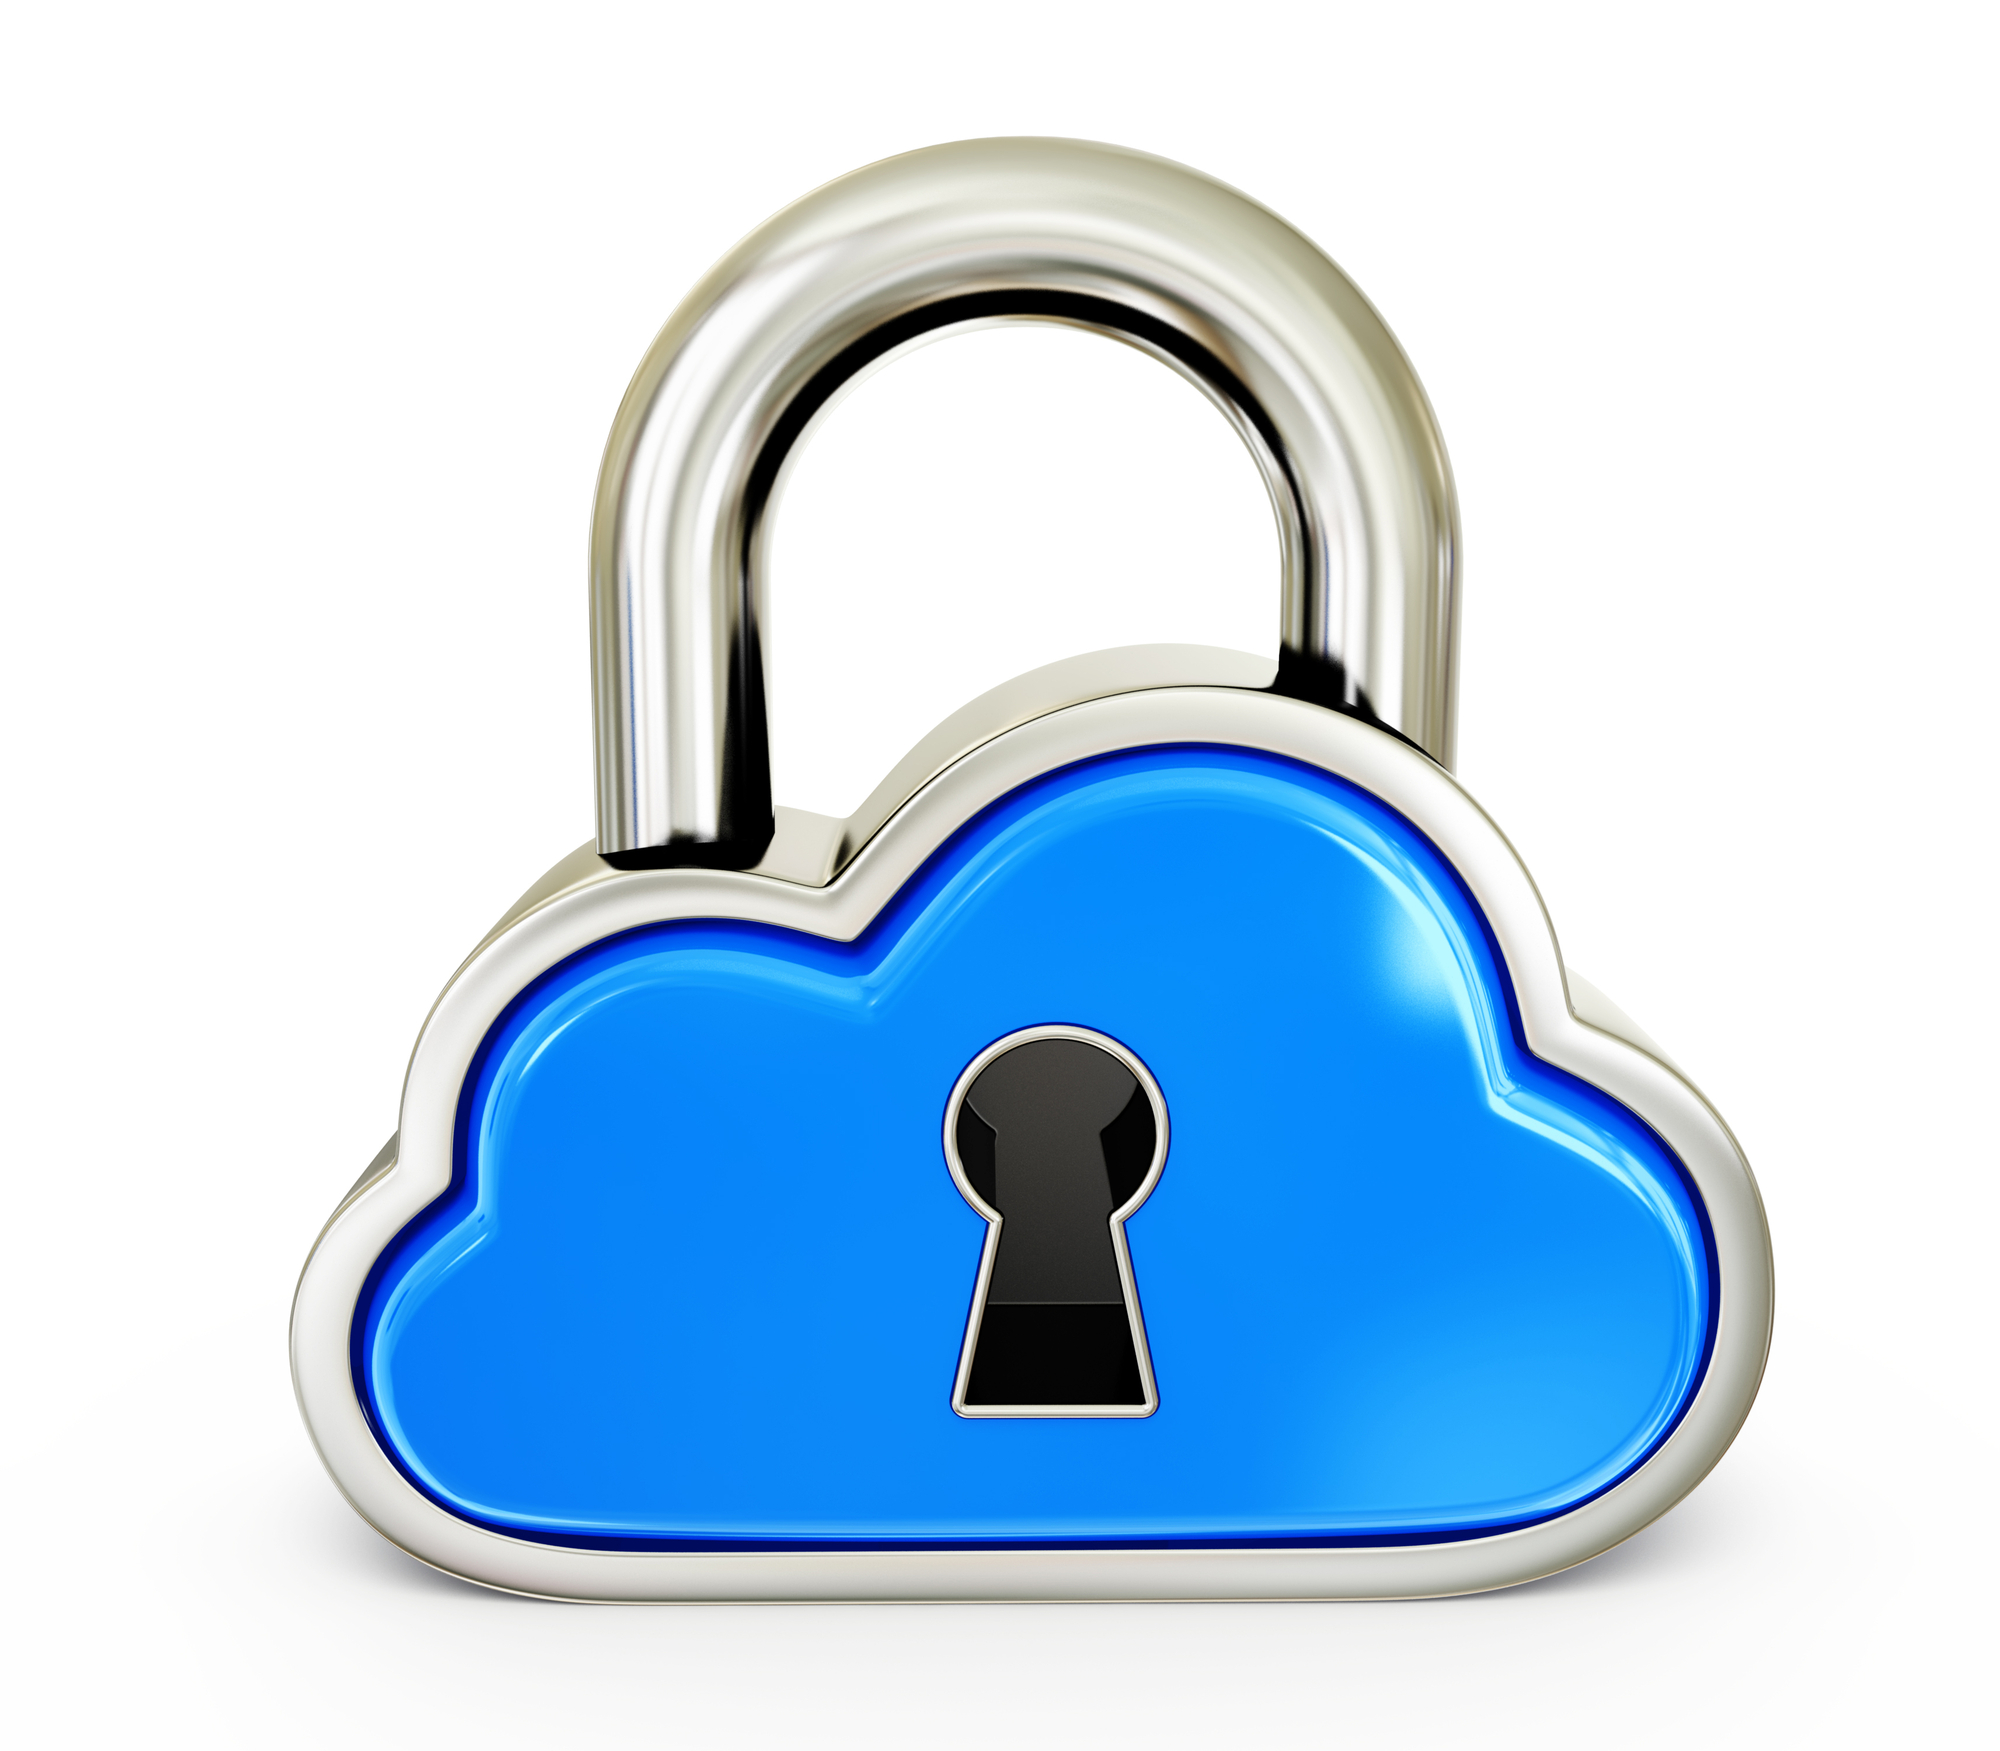 Padlock shaped like a cloud symbolizing the security of the Cloud for data storage.